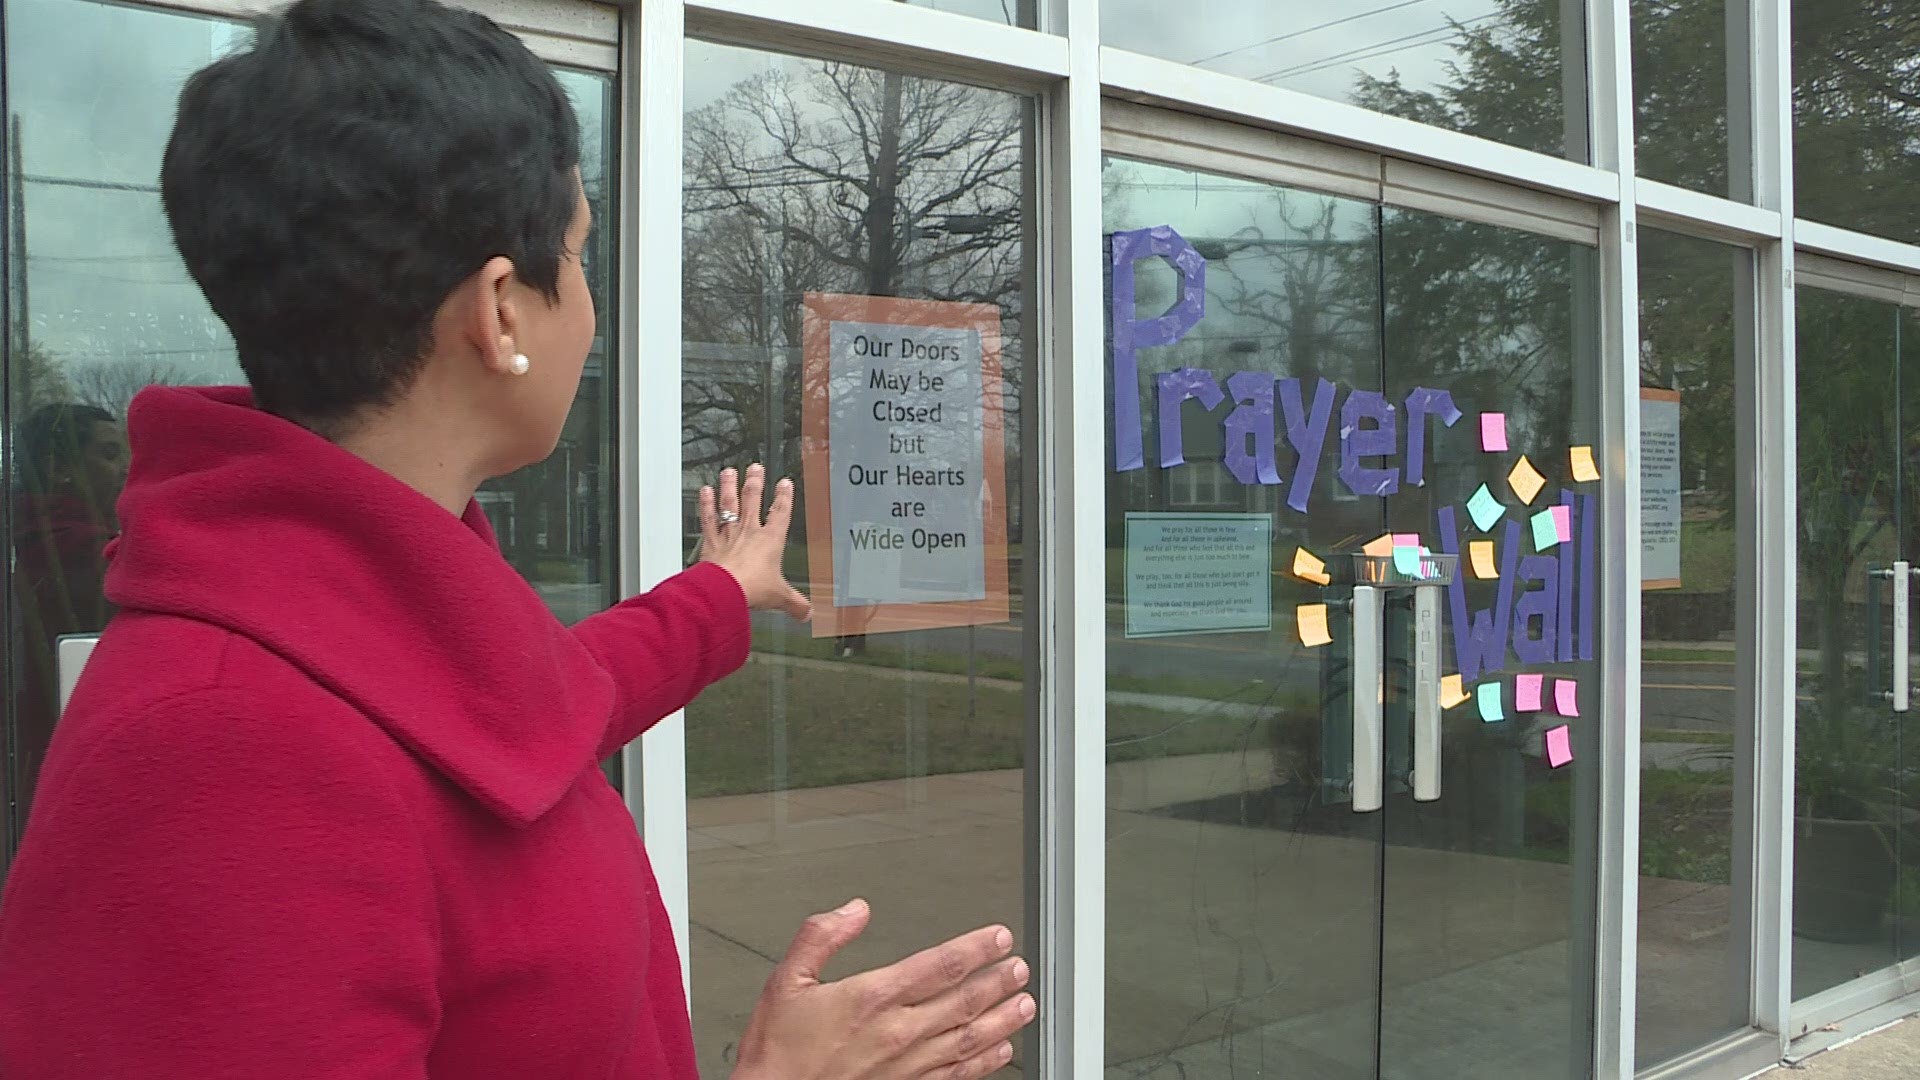 A prayer that says, "God see us through" is bringing some hope and shedding some light in a D.C. community during the coronavirus pandemic.